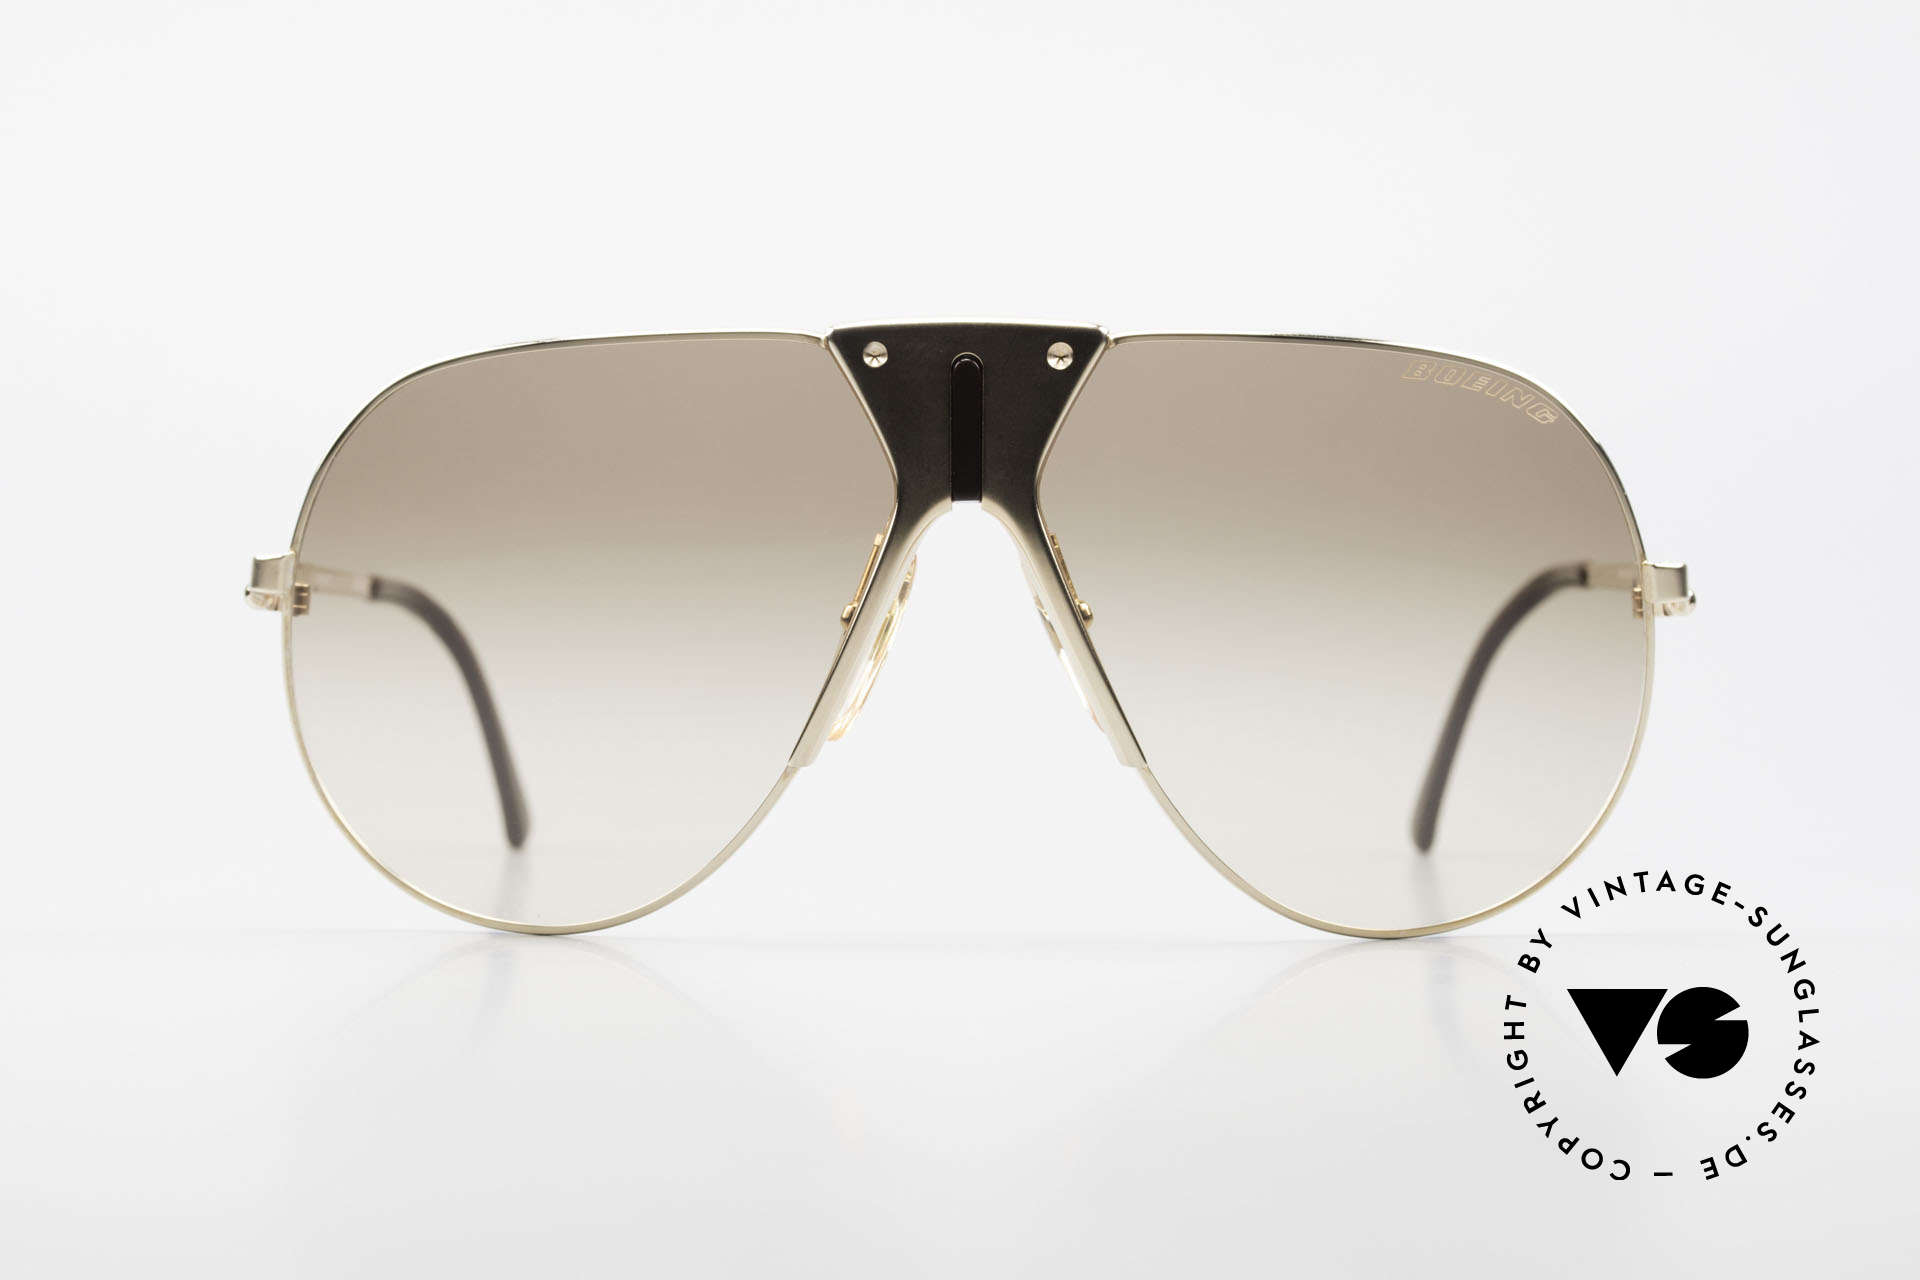 Boeing 5701 Famous 80's Pilots Sunglasses, MOD. 5701 = the most famous model of this series, Made for Men and Women